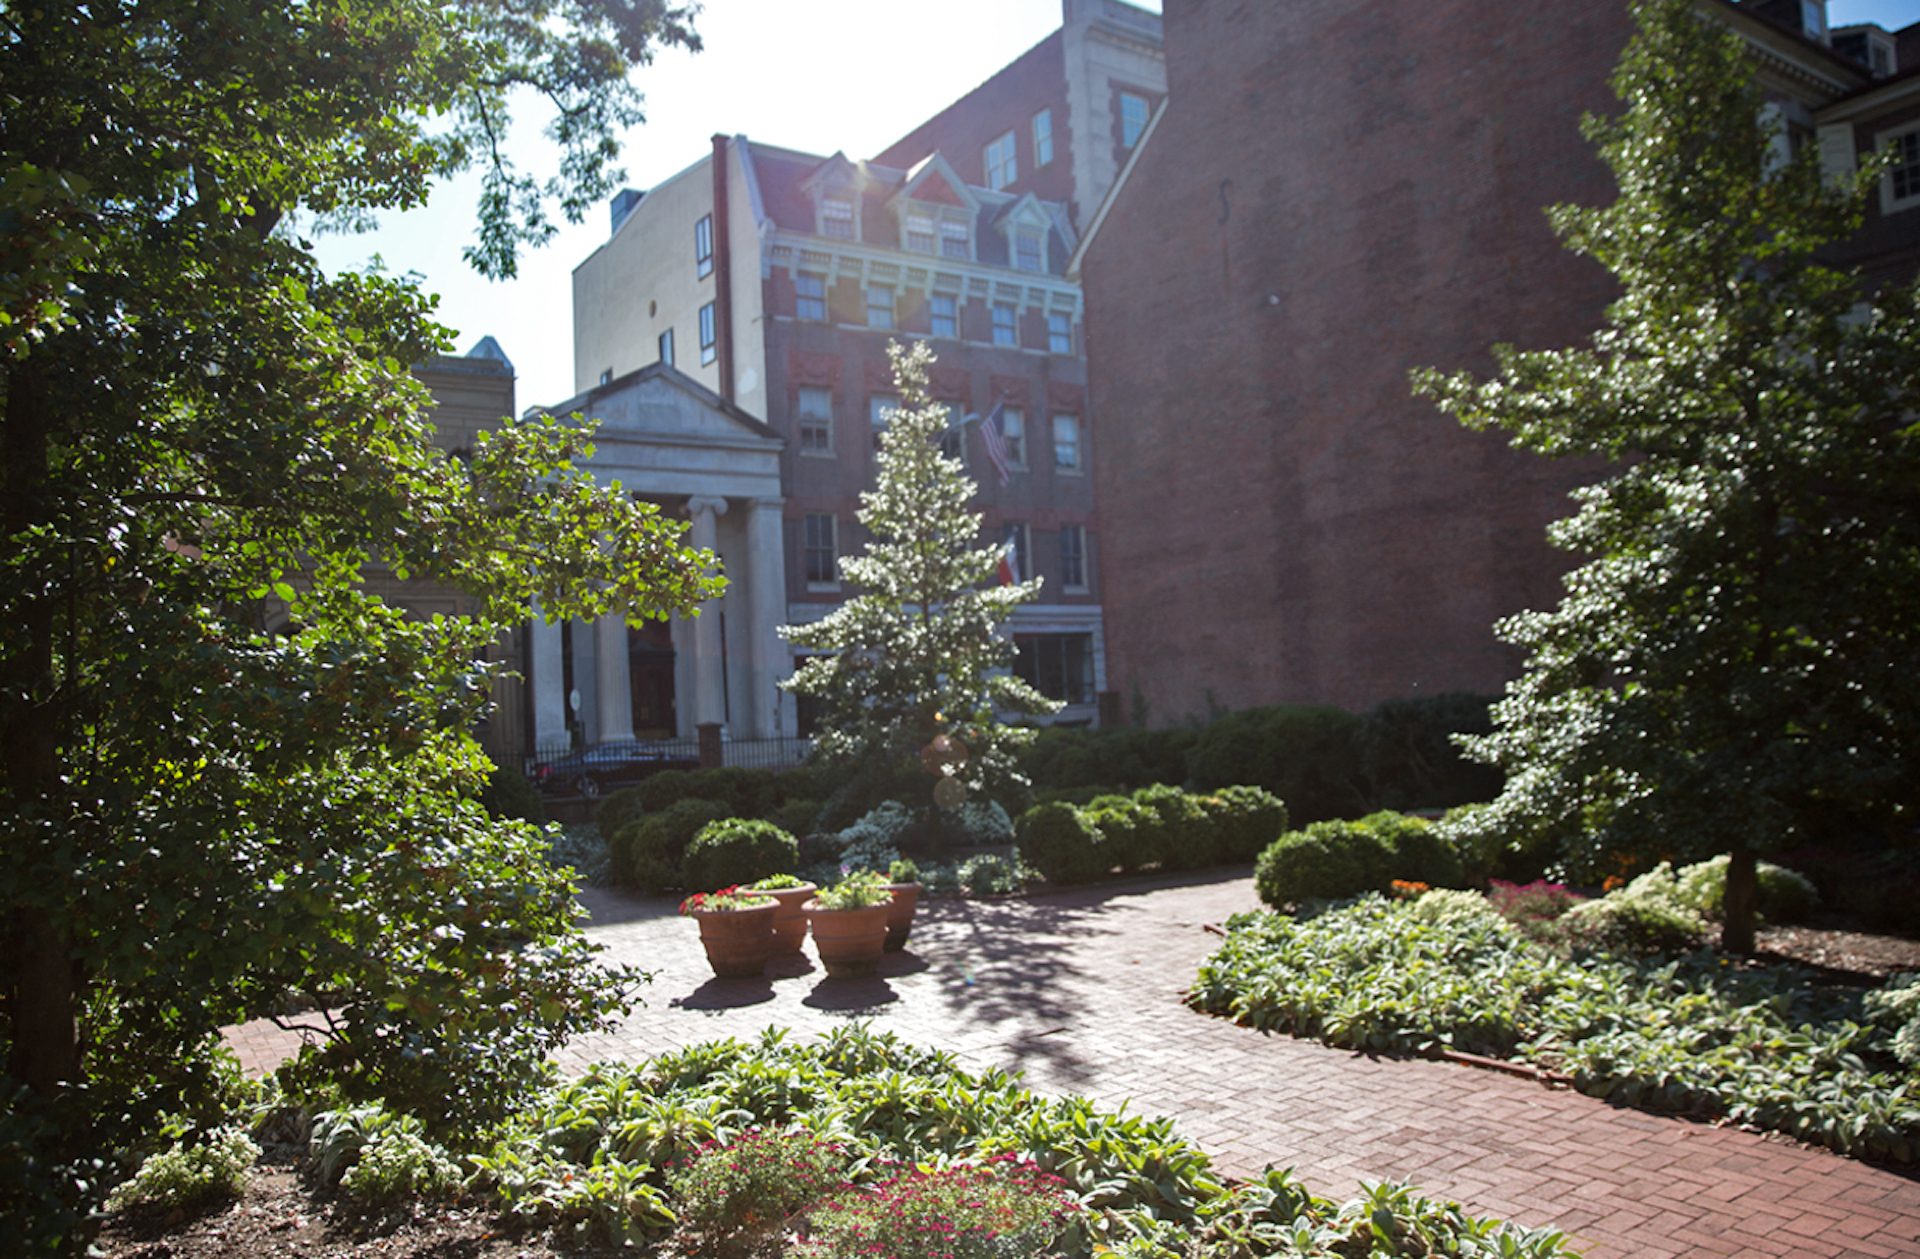 The Benjamin Rush Garden is part of the Independence National Historical Park at 3rd and Walnut Streets in Philadelphia, Pa. It marks the site of where Dr. Benjamin Rush lived from 1970-1973.